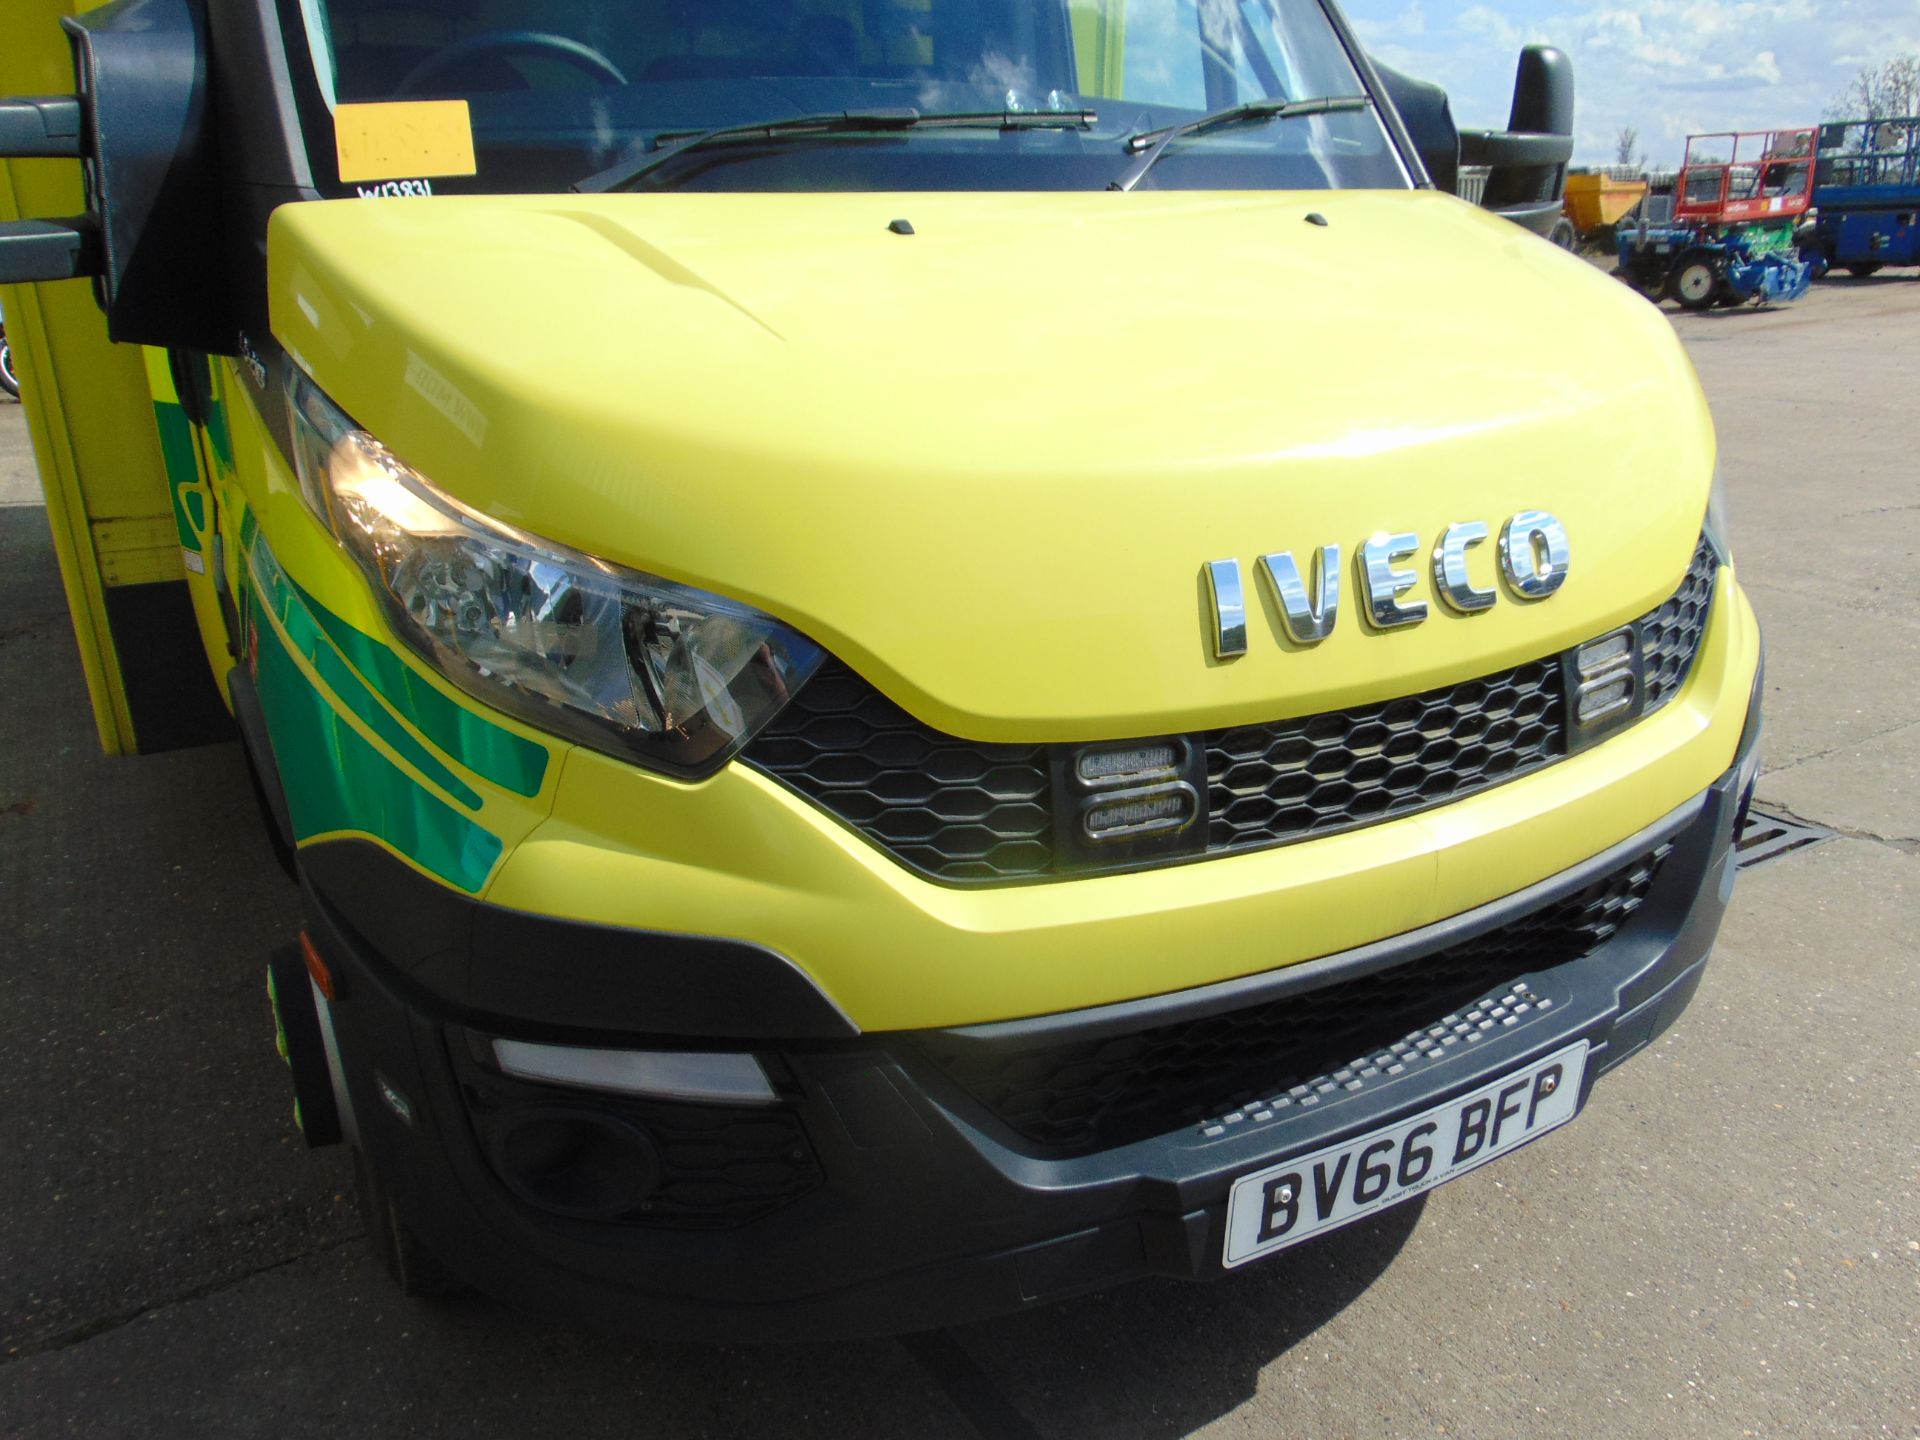 2016 Iveco Daily 70C21 4 x2 3.0Ltr Diesel - Incident Support Box Truck - Image 16 of 67